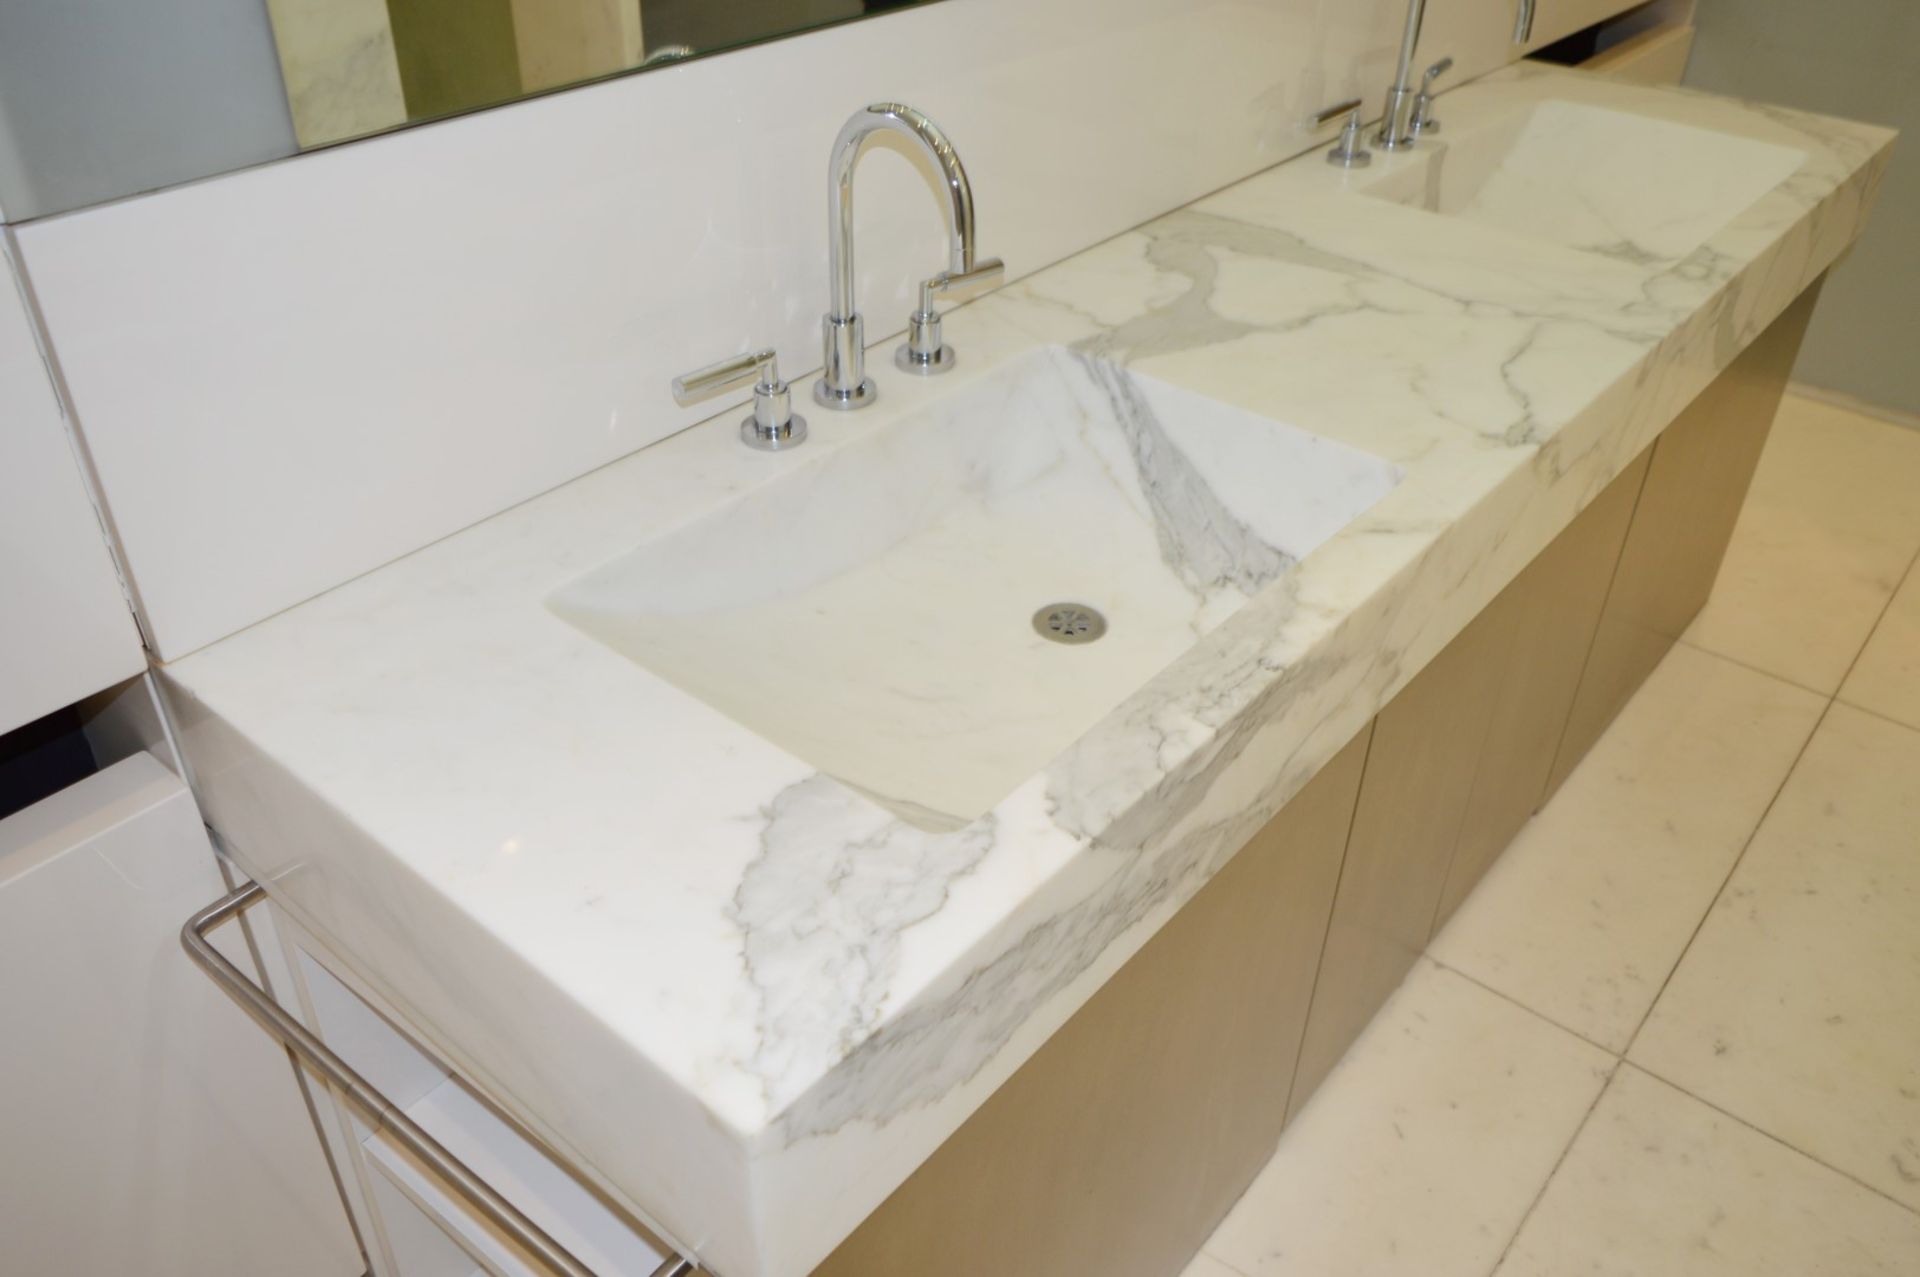 1 x Bespoke His & Hers Marble Bathroom Vanity Unit - Exquisite 7ft Twin Marble Sink Basin With Two - Image 4 of 25